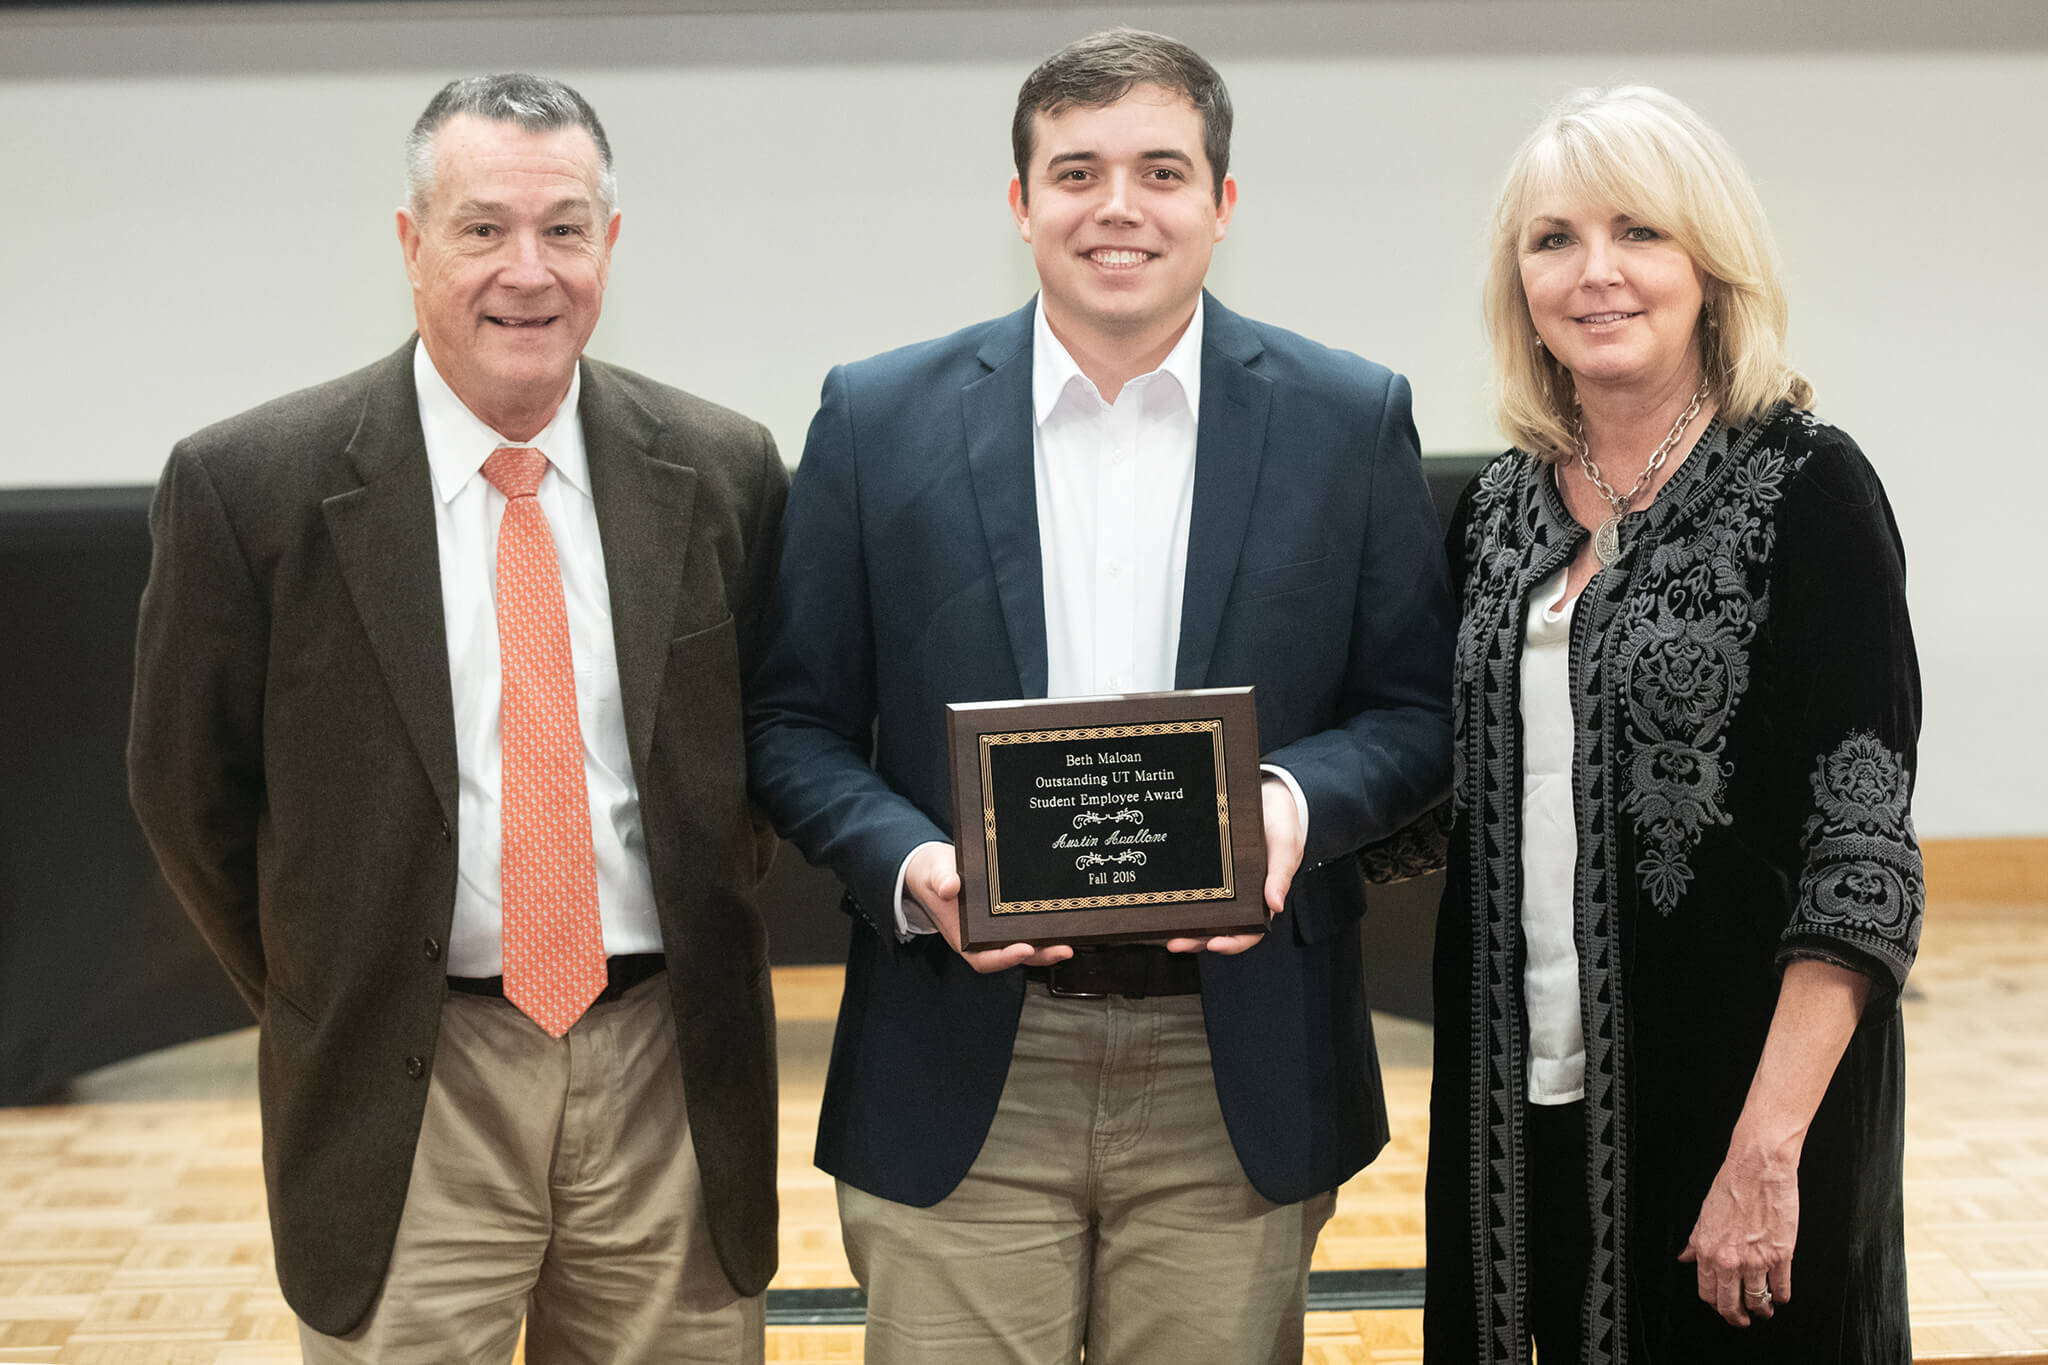 Christopher Austin Avallone (center), of Springfield, received the University of Tennessee at Martin’s Beth Maloan Outstanding Student Employee Award for the fall 2018 semester during a presentation Dec. 7. He is pictured with Maloan family representatives Chancellor Mike Maloan (right) and Sharon Maloan.